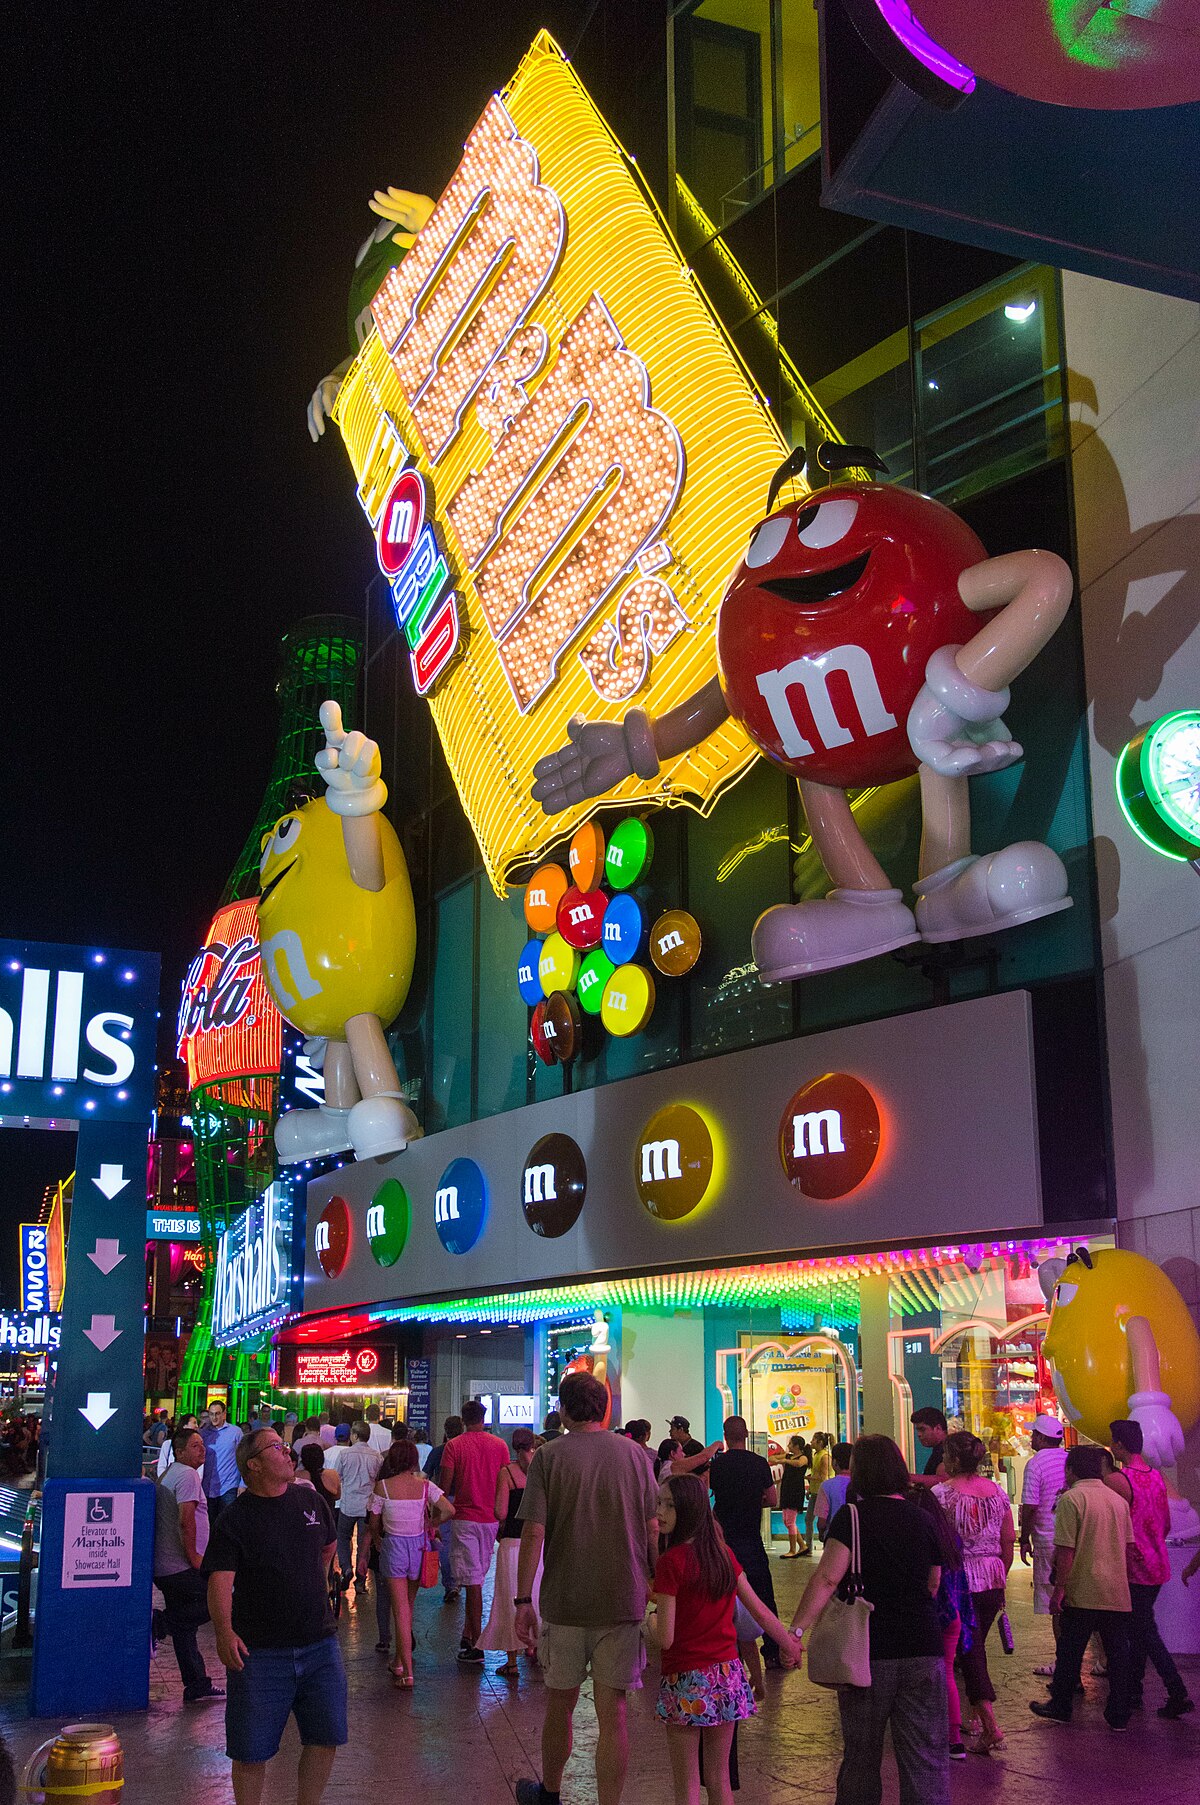 I visited the biggest M&M's store IN THE WORLD 🍬 It has 4 floors